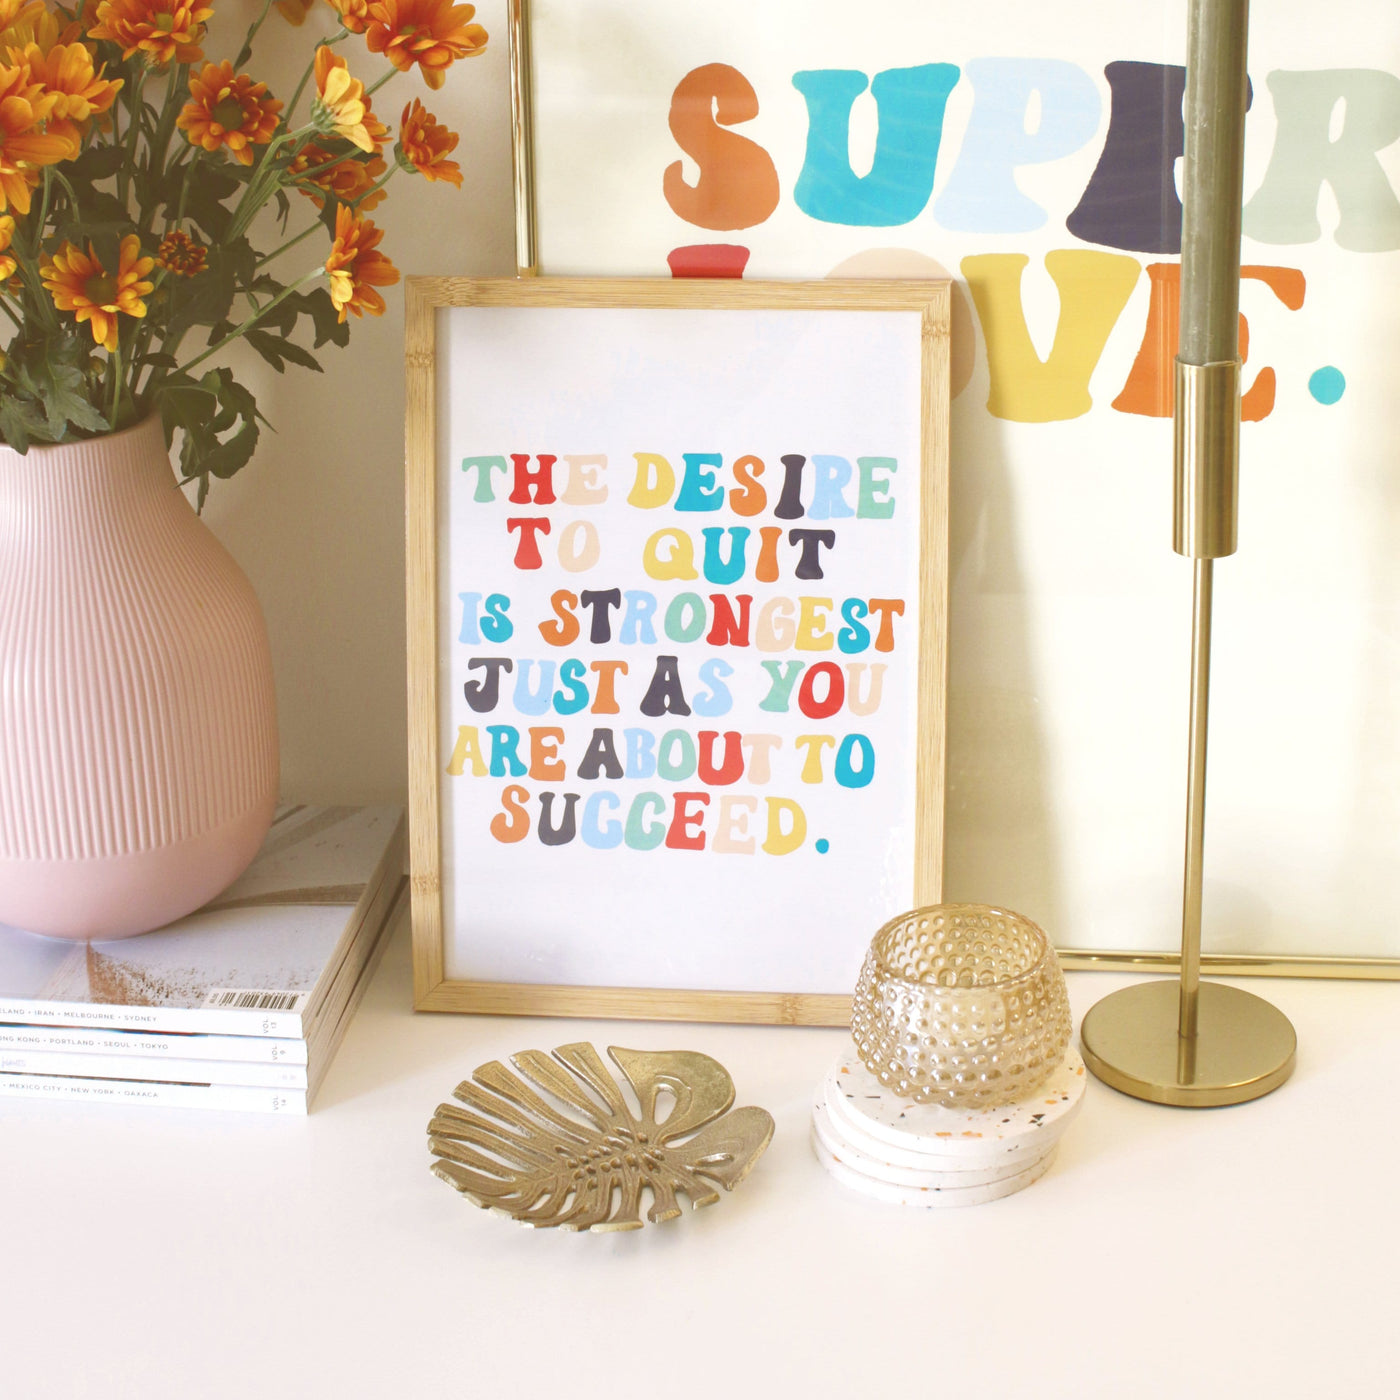 A Hand Lettered Rainbow Typography Motivational Print In A Light Oak Frame On A Desk - Annie Dornan Smith